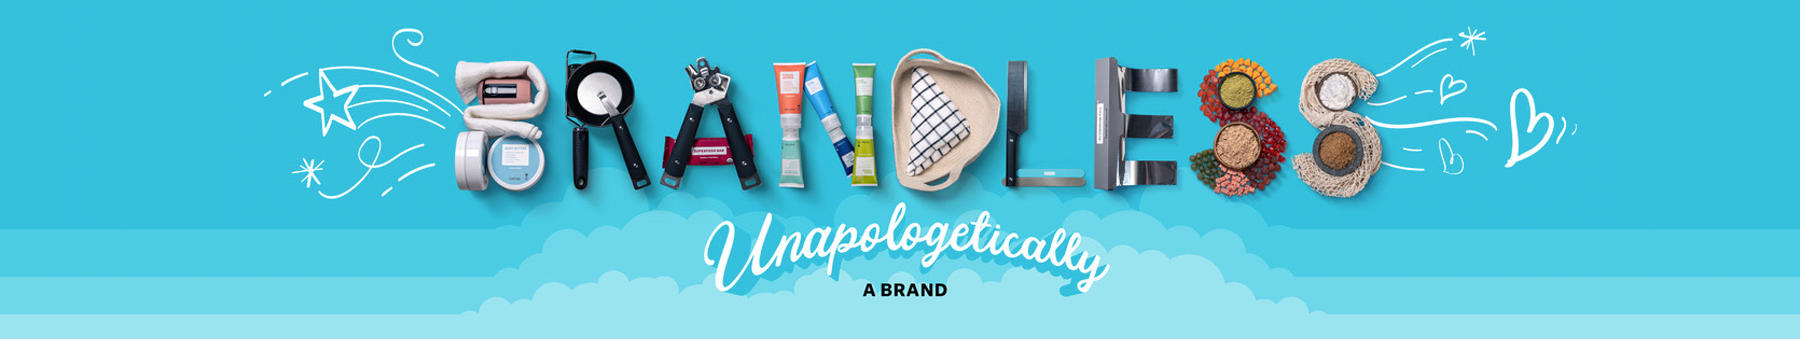 Brandless, Unapologetically a Brand